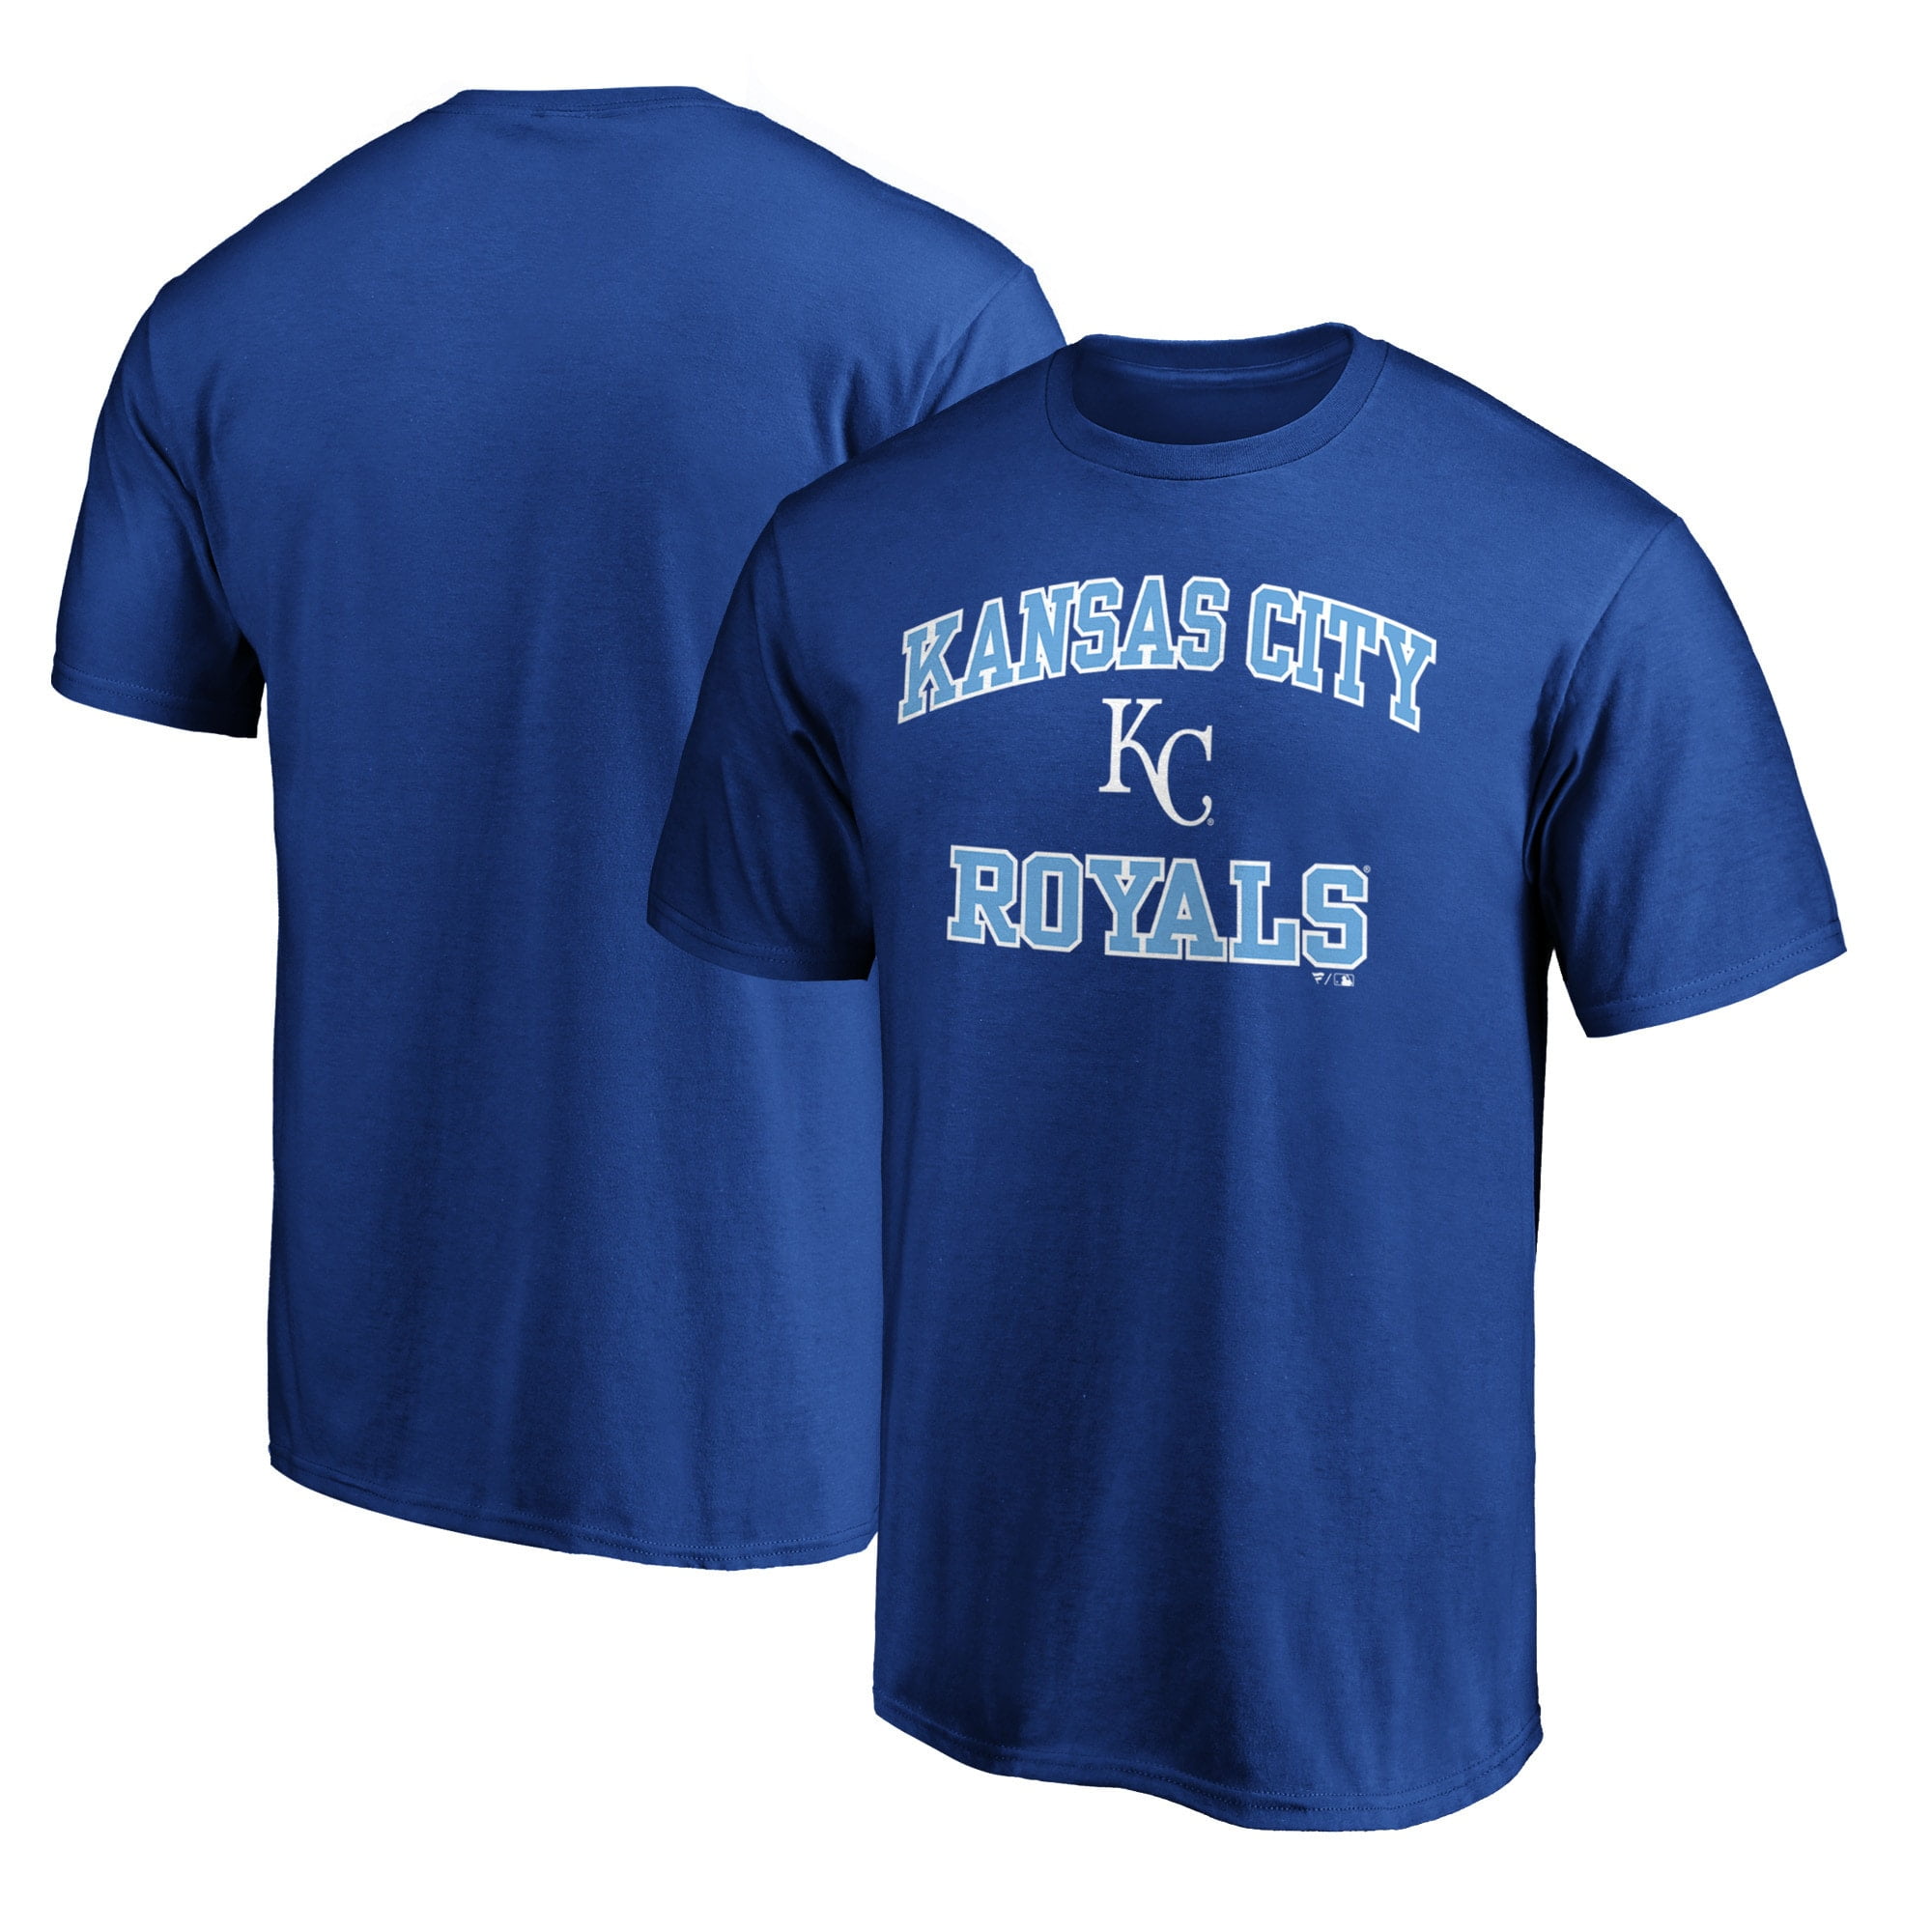 royals shirt with heart